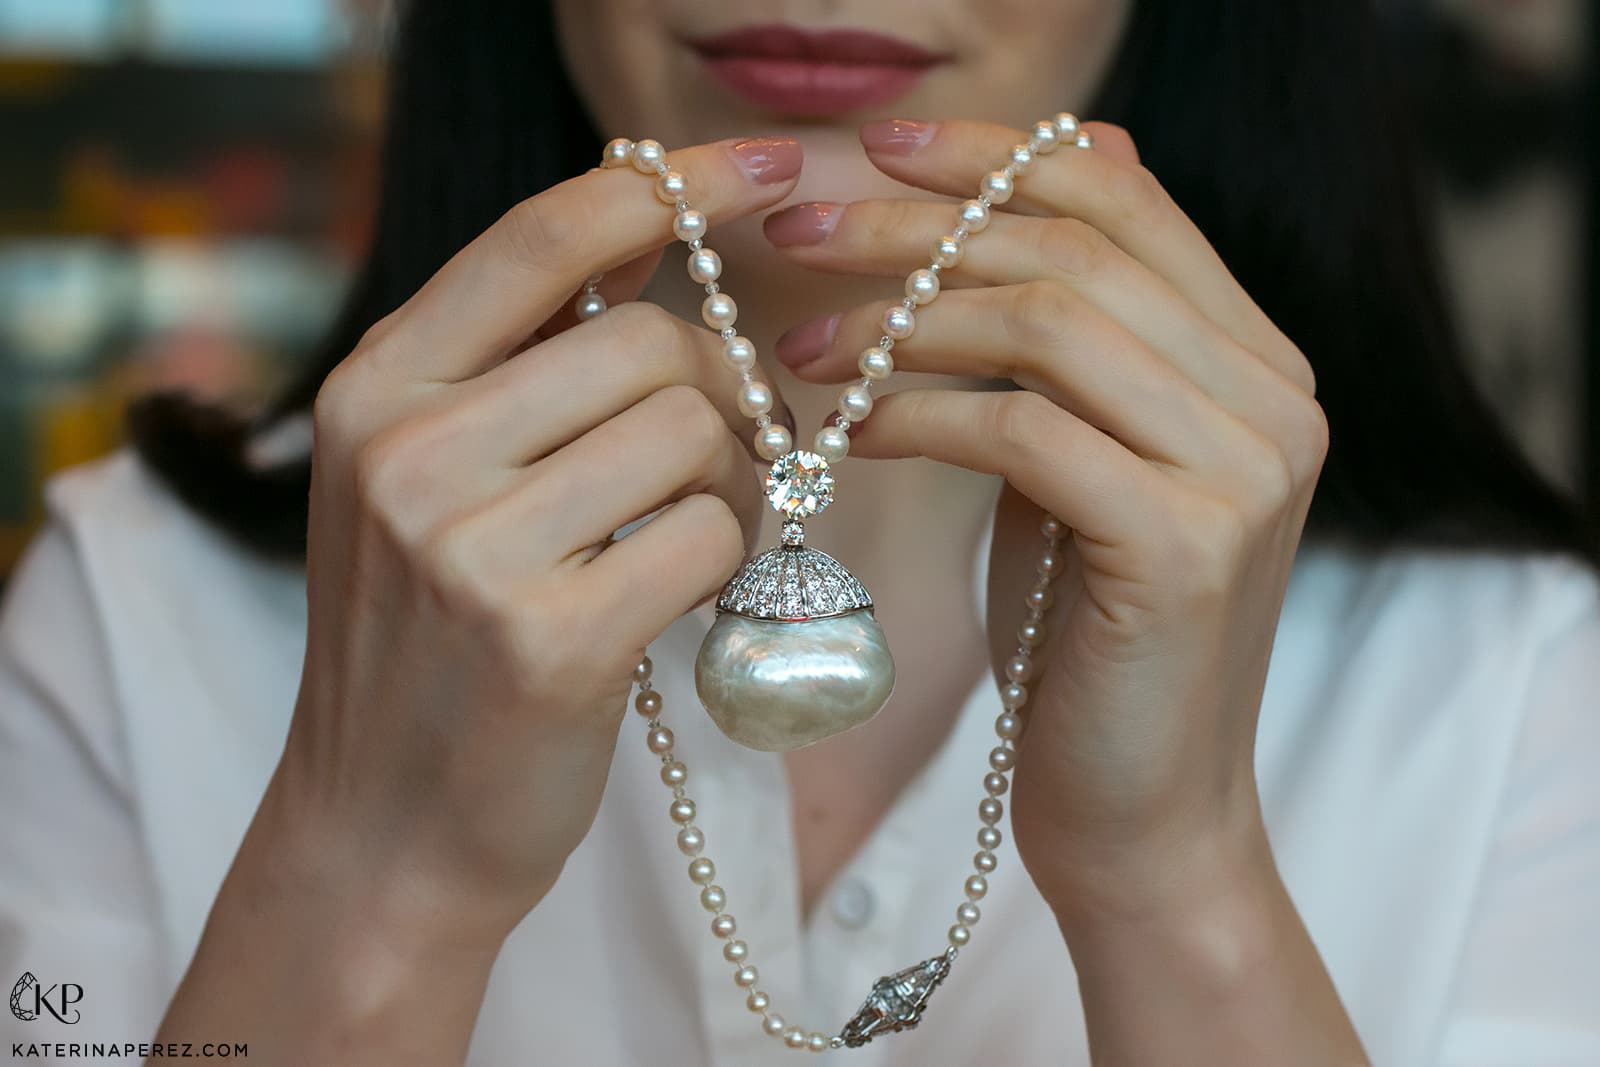 Katerina holds an incredible baroque pearl necklace with diamonds